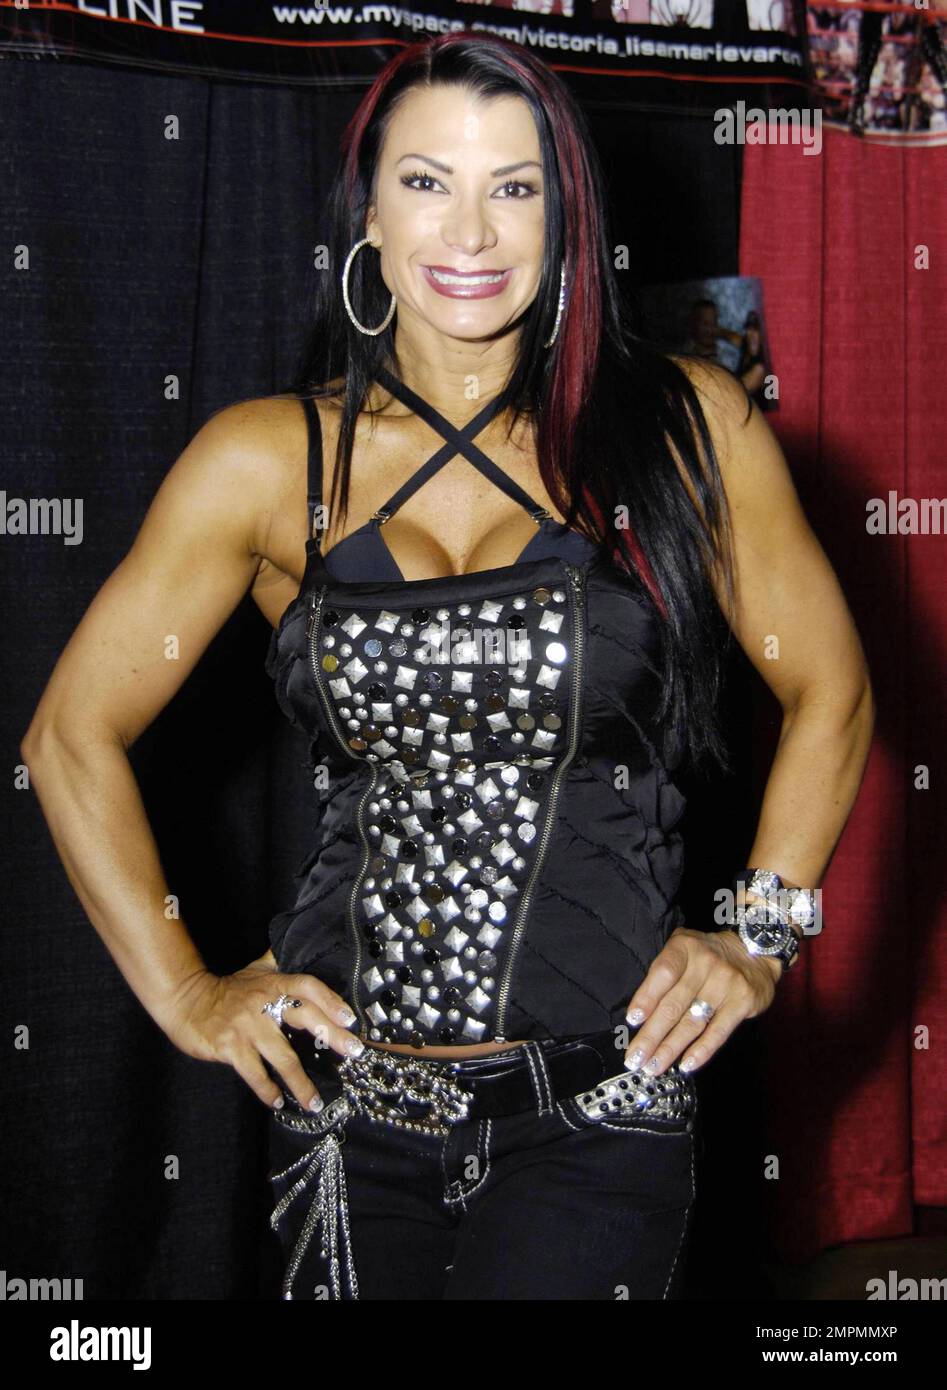 Bodybuilder Lisa Marie Varon attends Wizard World Chicago Comic Con held at The Donald E. Stephens Convention and Conference Center in Rosemont near Chicago. Rosemont, IL. 08/21/10. Stock Photo